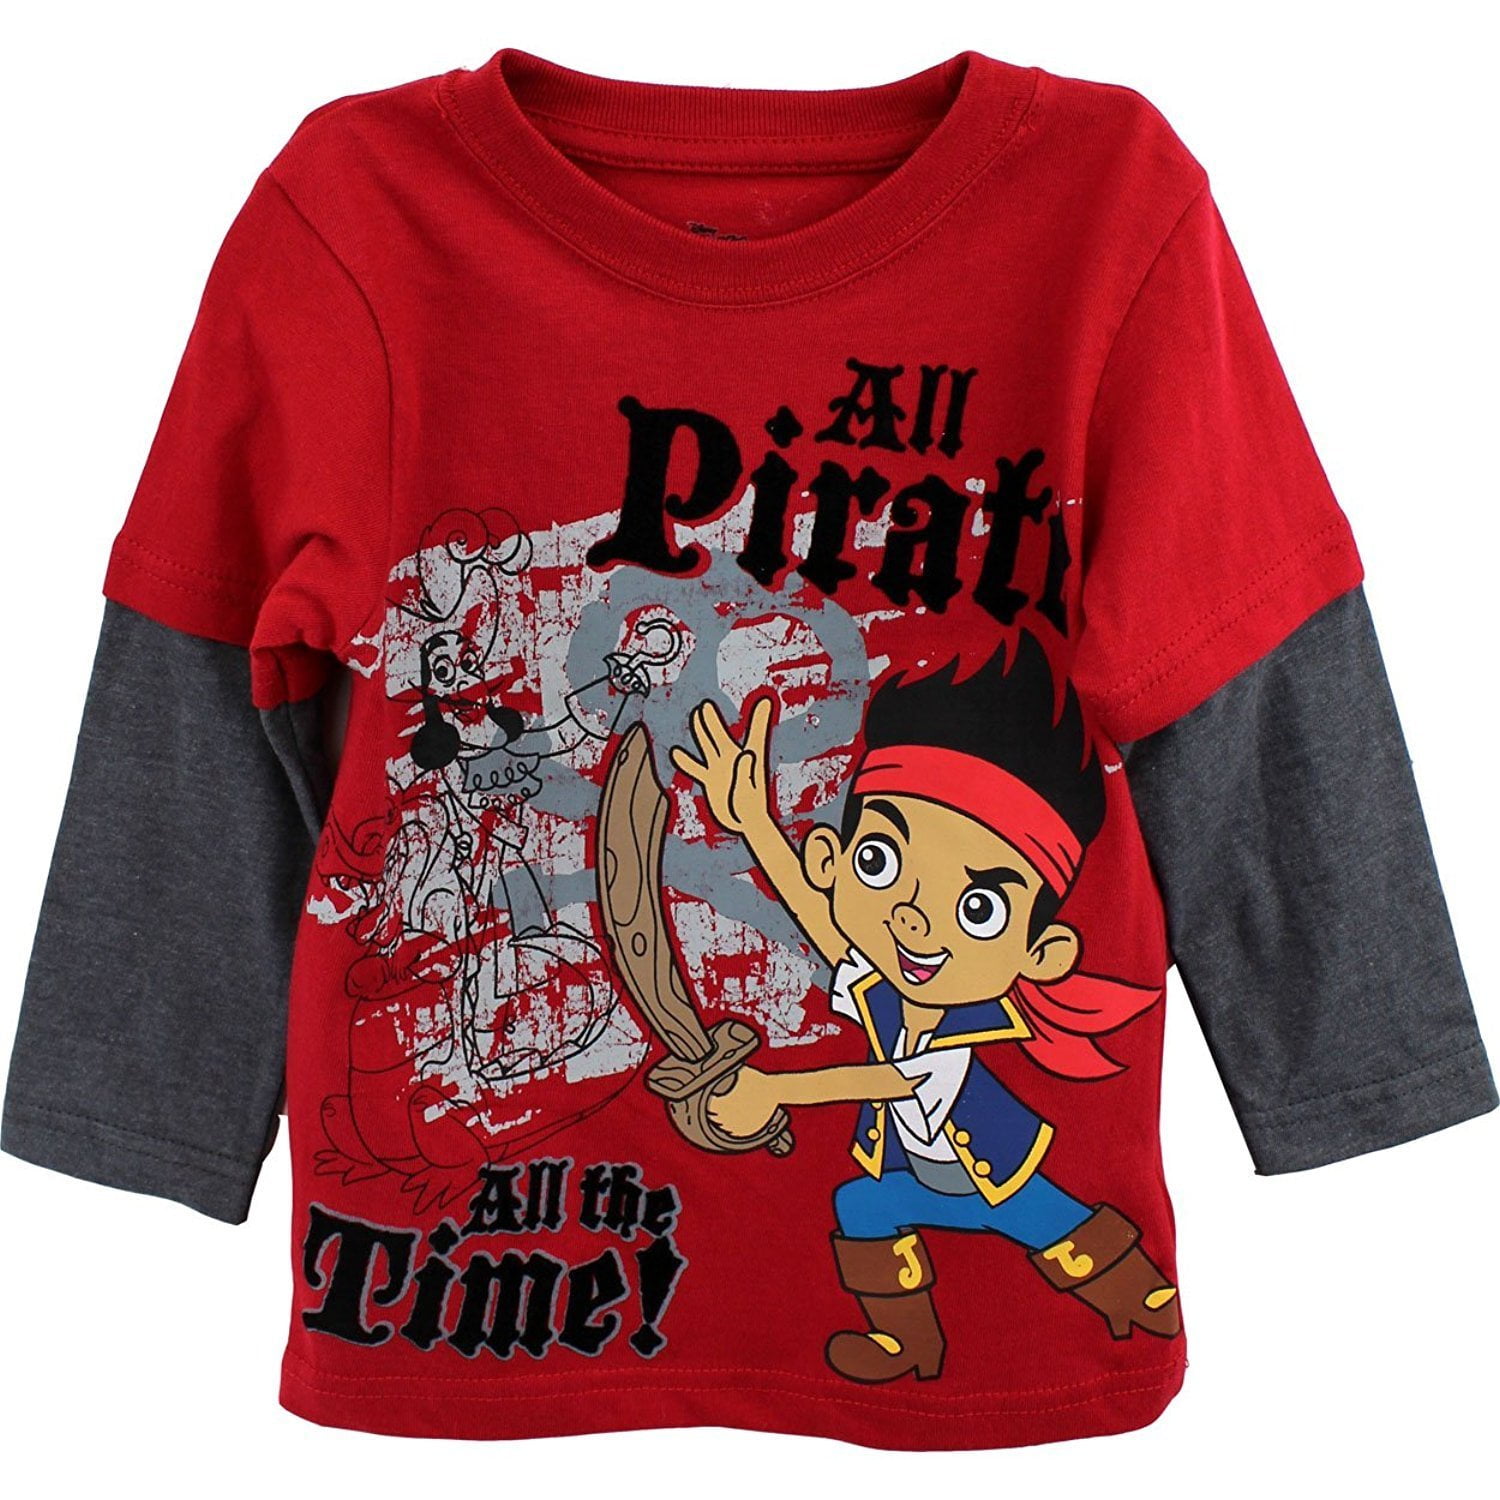 BOYS LONG SLEEVED TOP DISNEY JAKE AND THE NEVERLAND PIRATES 1-5 YEARS 